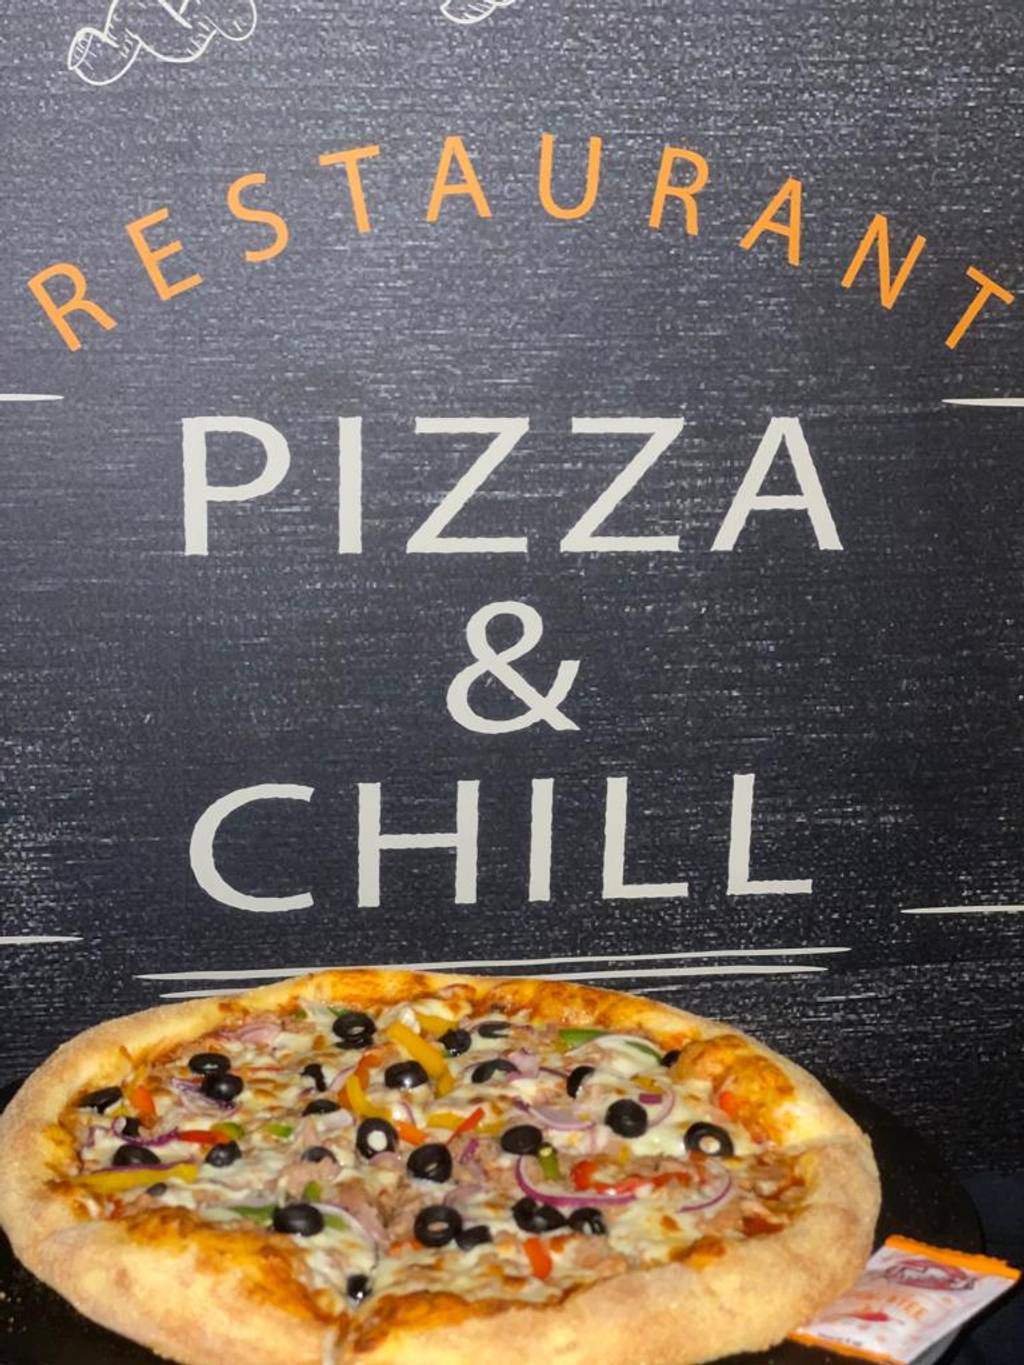 Pizza & Chill Argenteuil - Food Pizza Ingredient Recipe Font